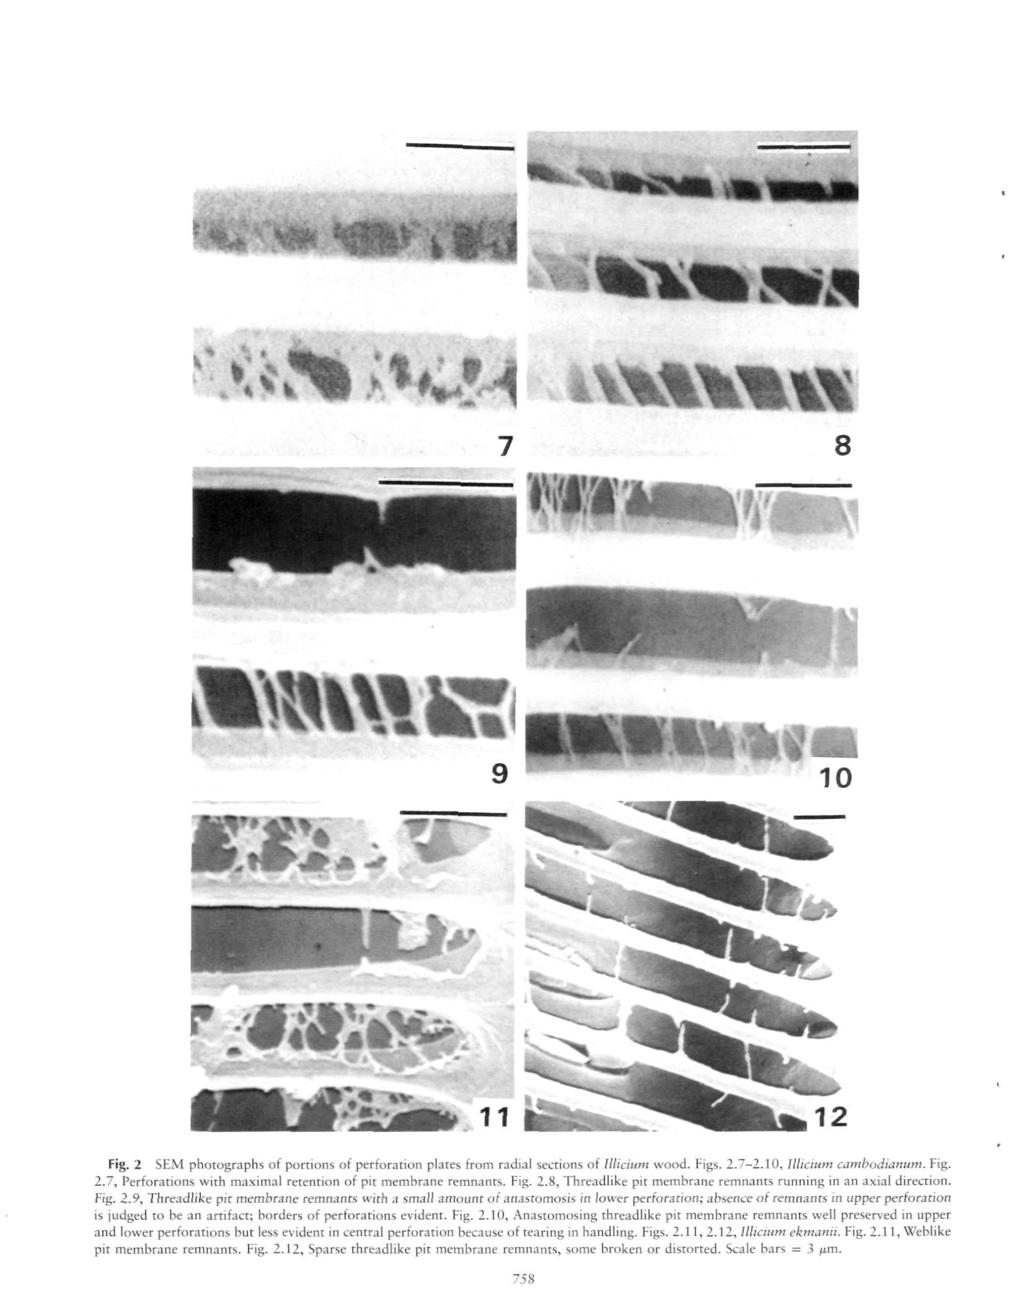 v\ fc»w\\%\\ 8 H MNtWIRi Oi* «. * # : * ^ 11 Fig. 2 SEM photographs of portions of perforation plates from radial sections of lllicium wood. Figs. 2.7-2.10, lllicium cambodianum. Fig. 2.7, Perforations with maximal retention of pit membrane remnants.